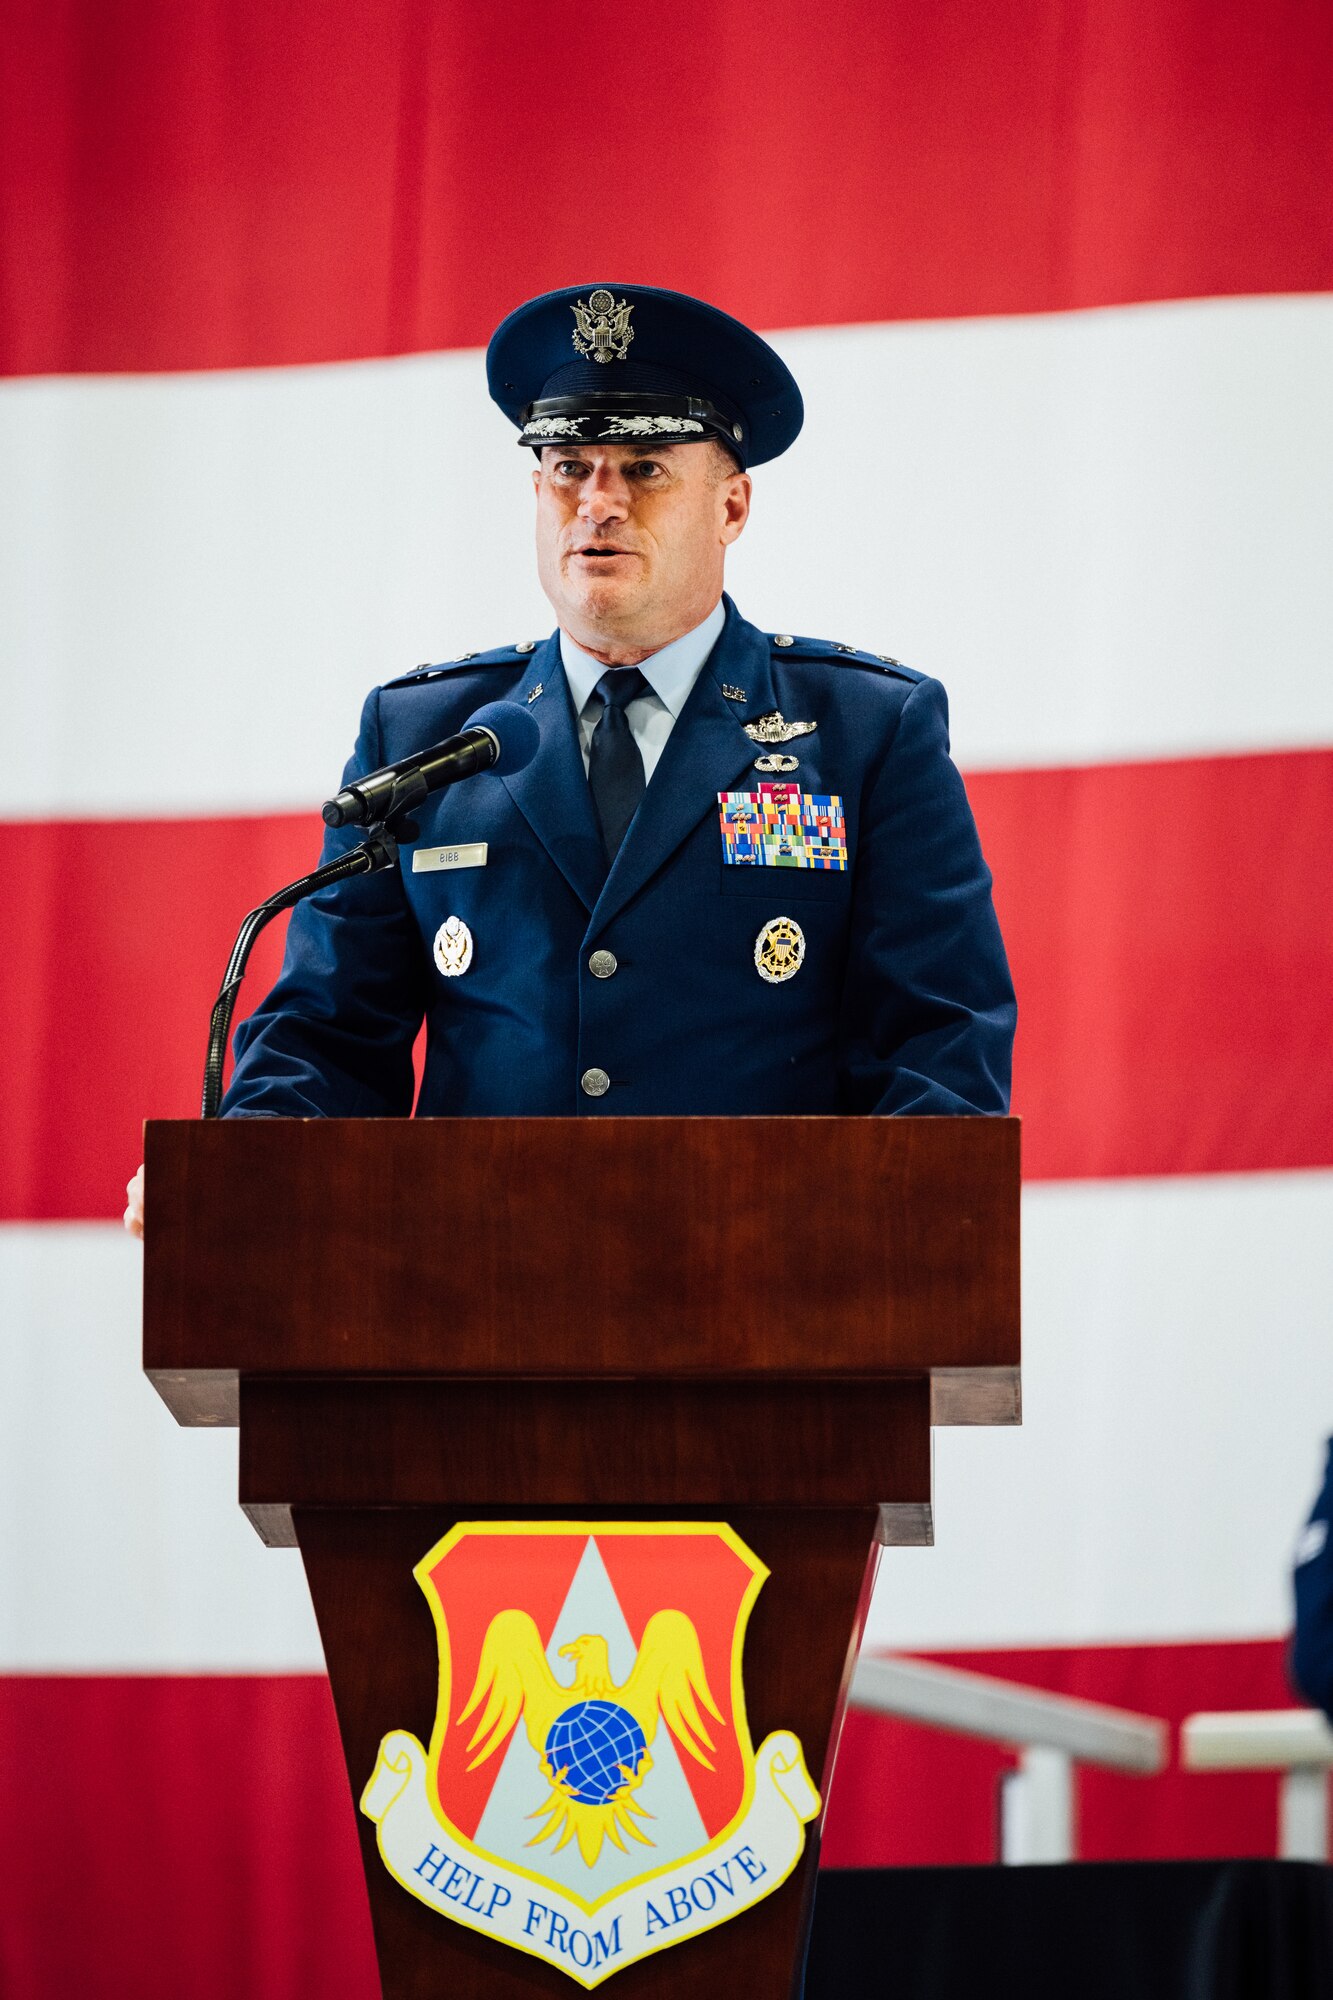 Maj. Gen. Thad Bibb, Jr., 18th Air Force commander, addresses the crowd in attendance for the 375th Air Mobility Wing change of command ceremony on Scott Air Force Base, Illinois, July 1, 2021. The change of command ceremony represents a time-honored military tradition providing an opportunity for Airmen to witness the transfer of power to their newly appointed commanding officer. (U.S. Air Force photo by Tech. Sgt. Jordan Castelan)